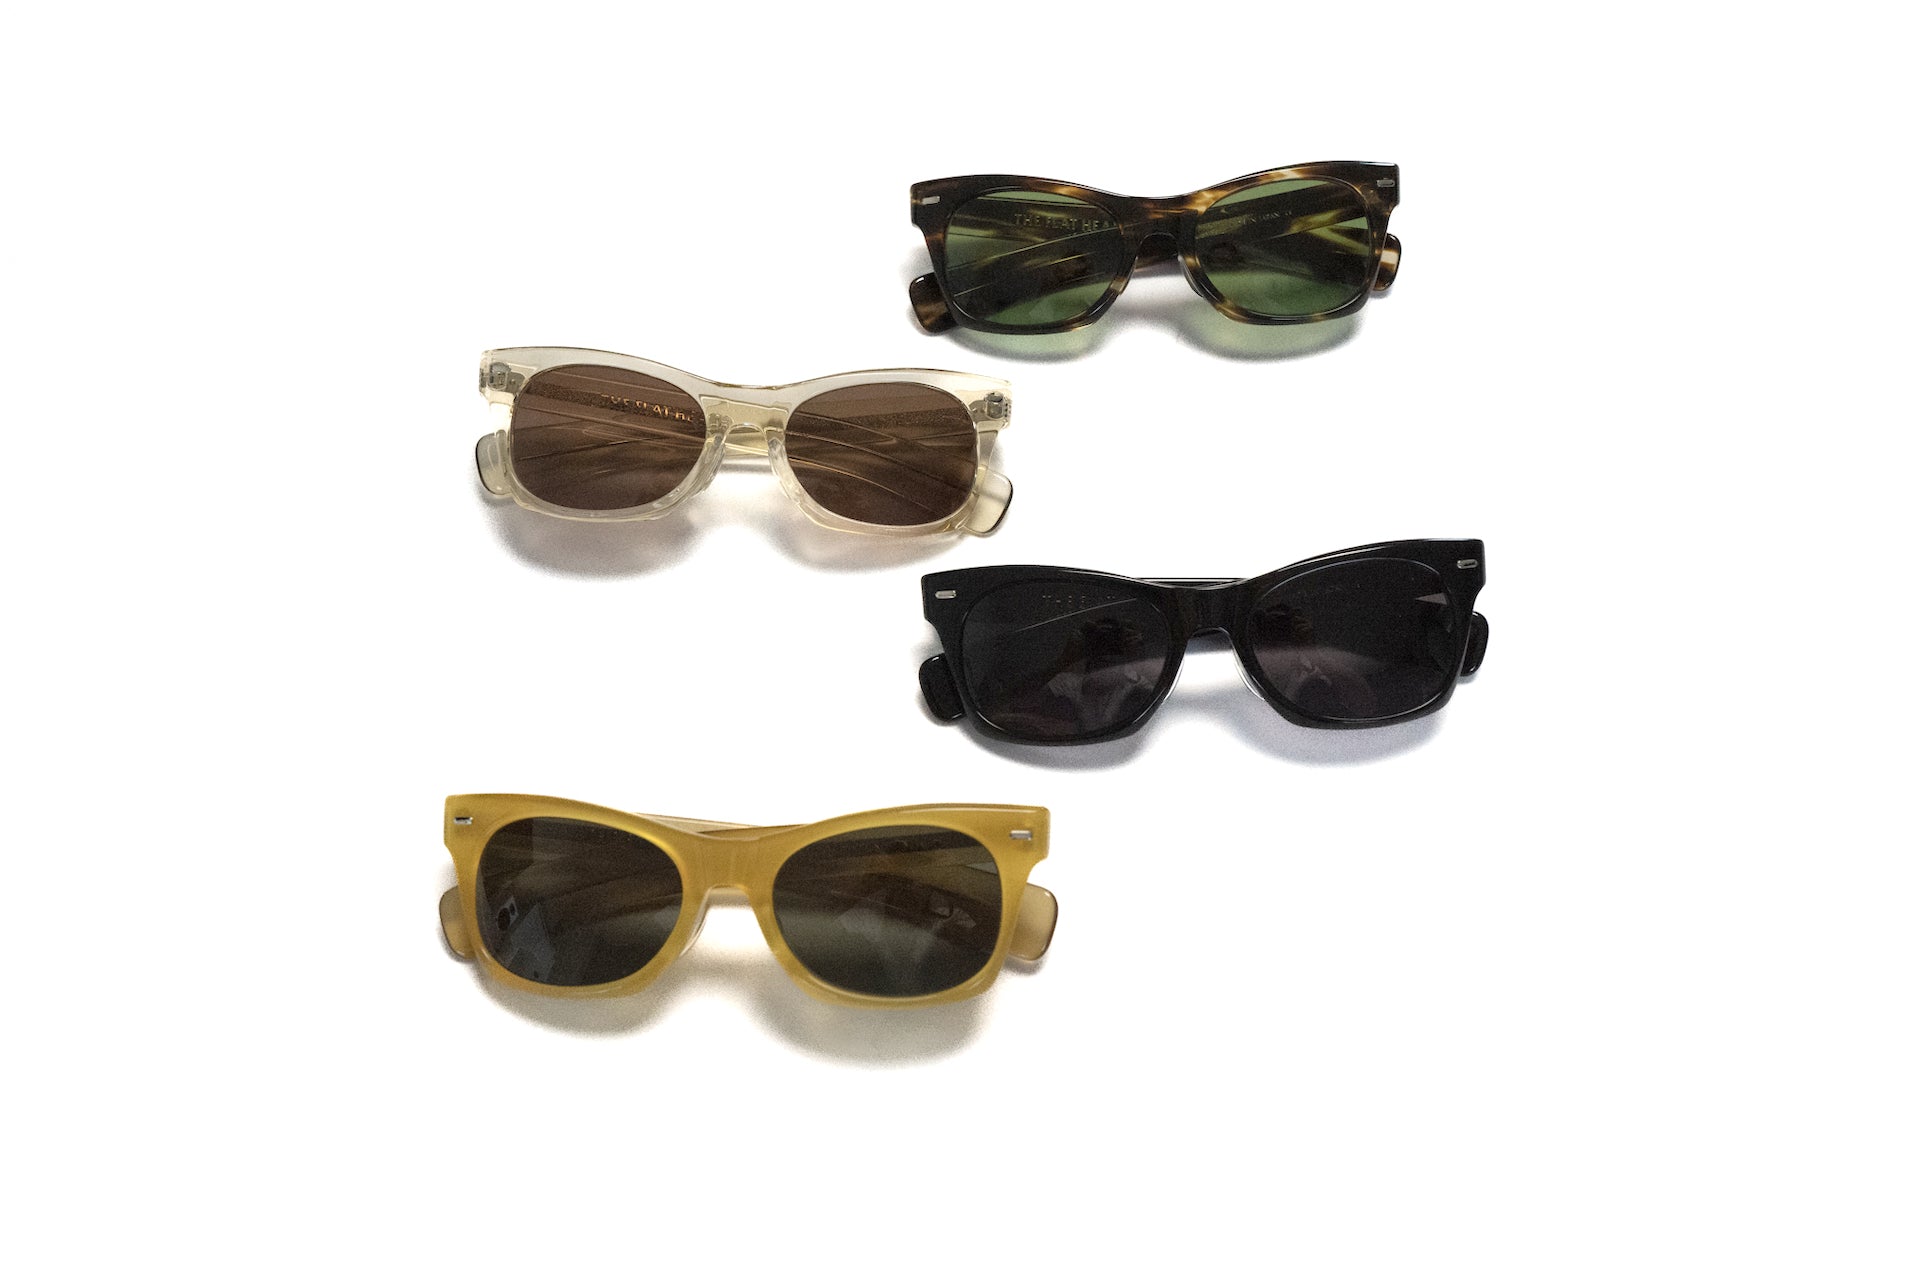 The Flat Head "Mid-Century" Acetate Sunglasses (Natural Clear)